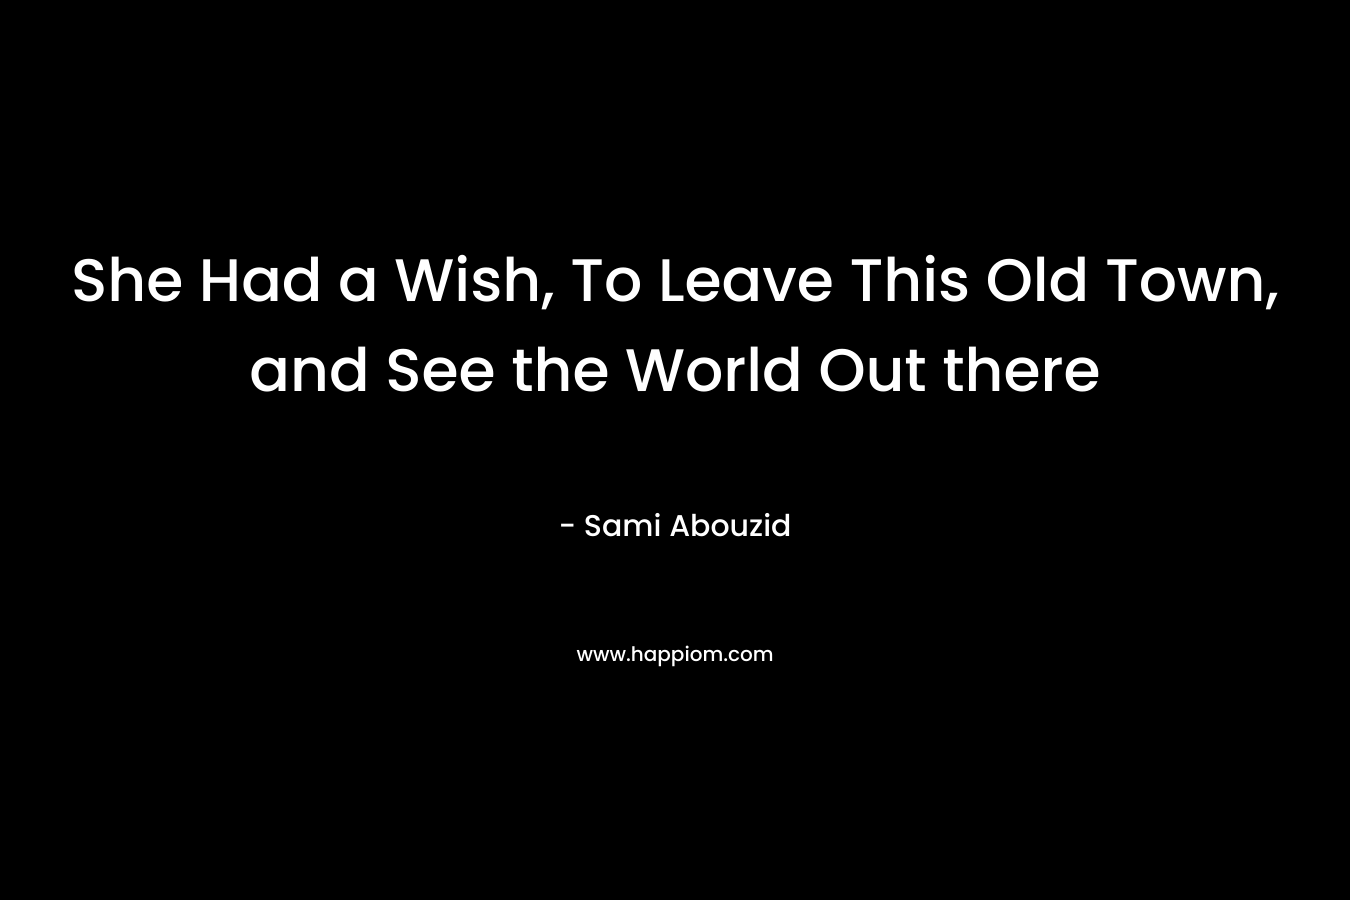 She Had a Wish, To Leave This Old Town, and See the World Out there